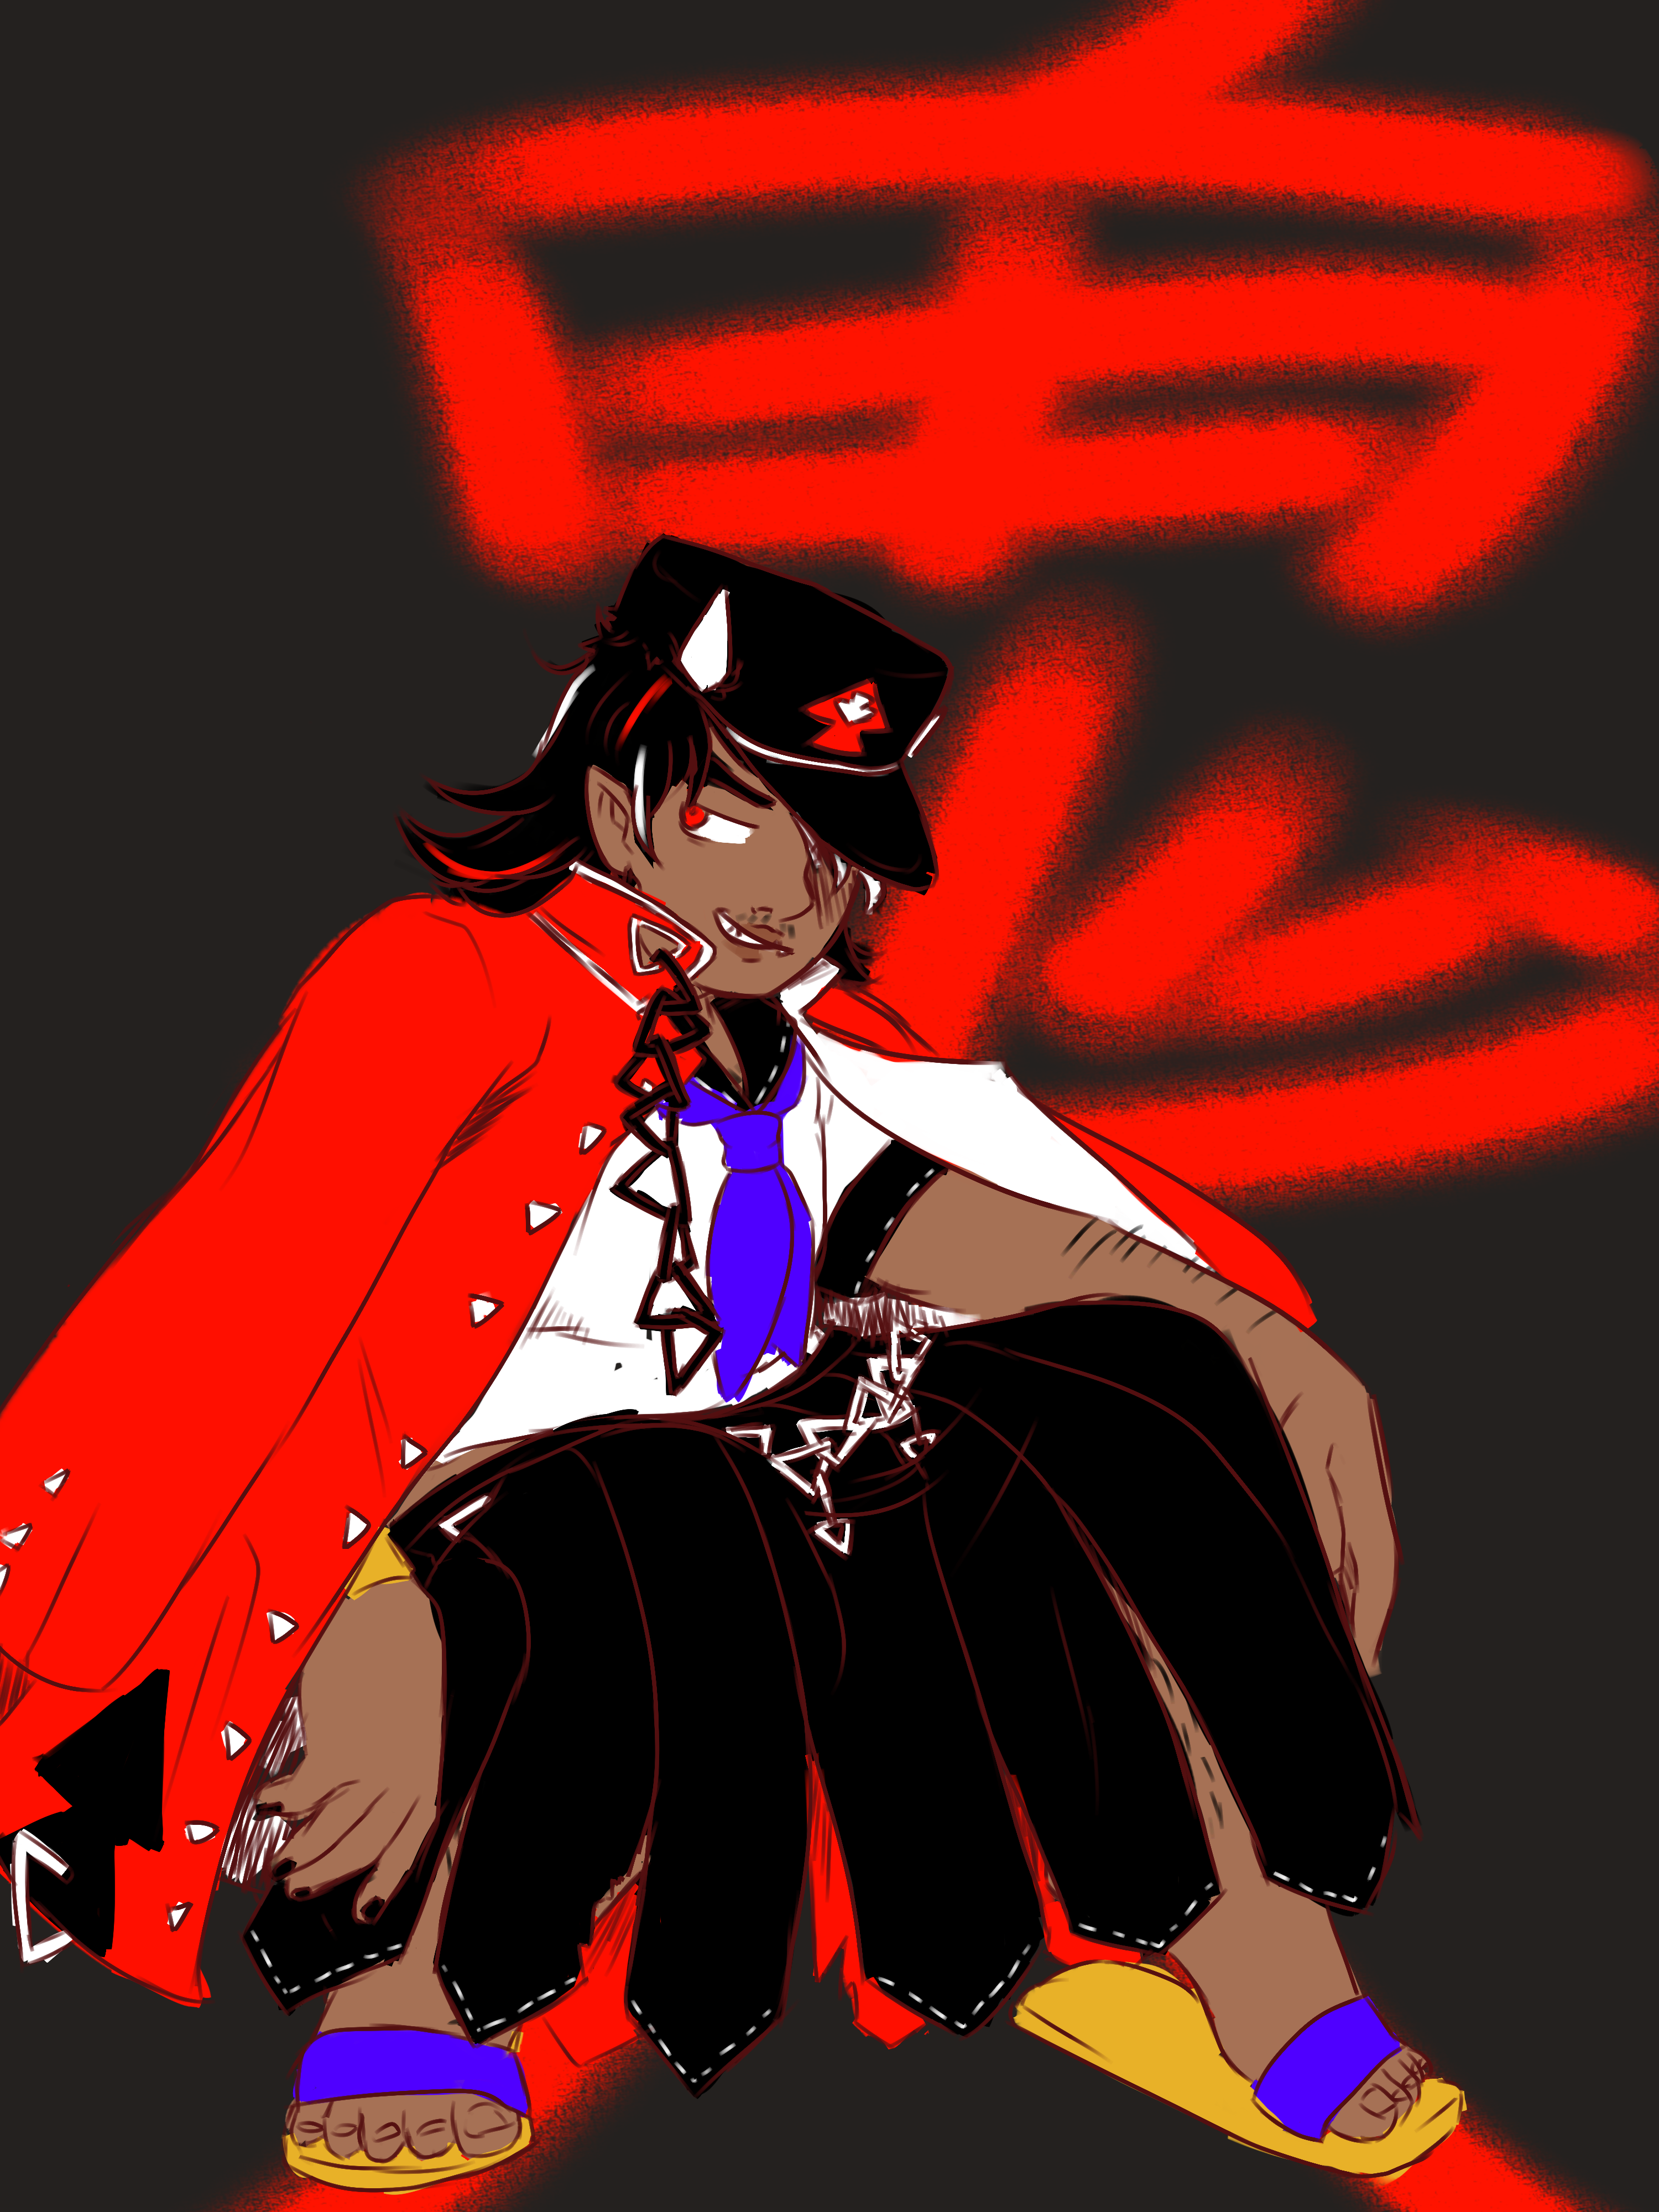 a drawing of Kijin Seija from Touhou, in her Mystia's Izakaya outfit. She's in the typical "delinquent squat" and is smirking. the kanji for her surname Kijin is written messily in the background.